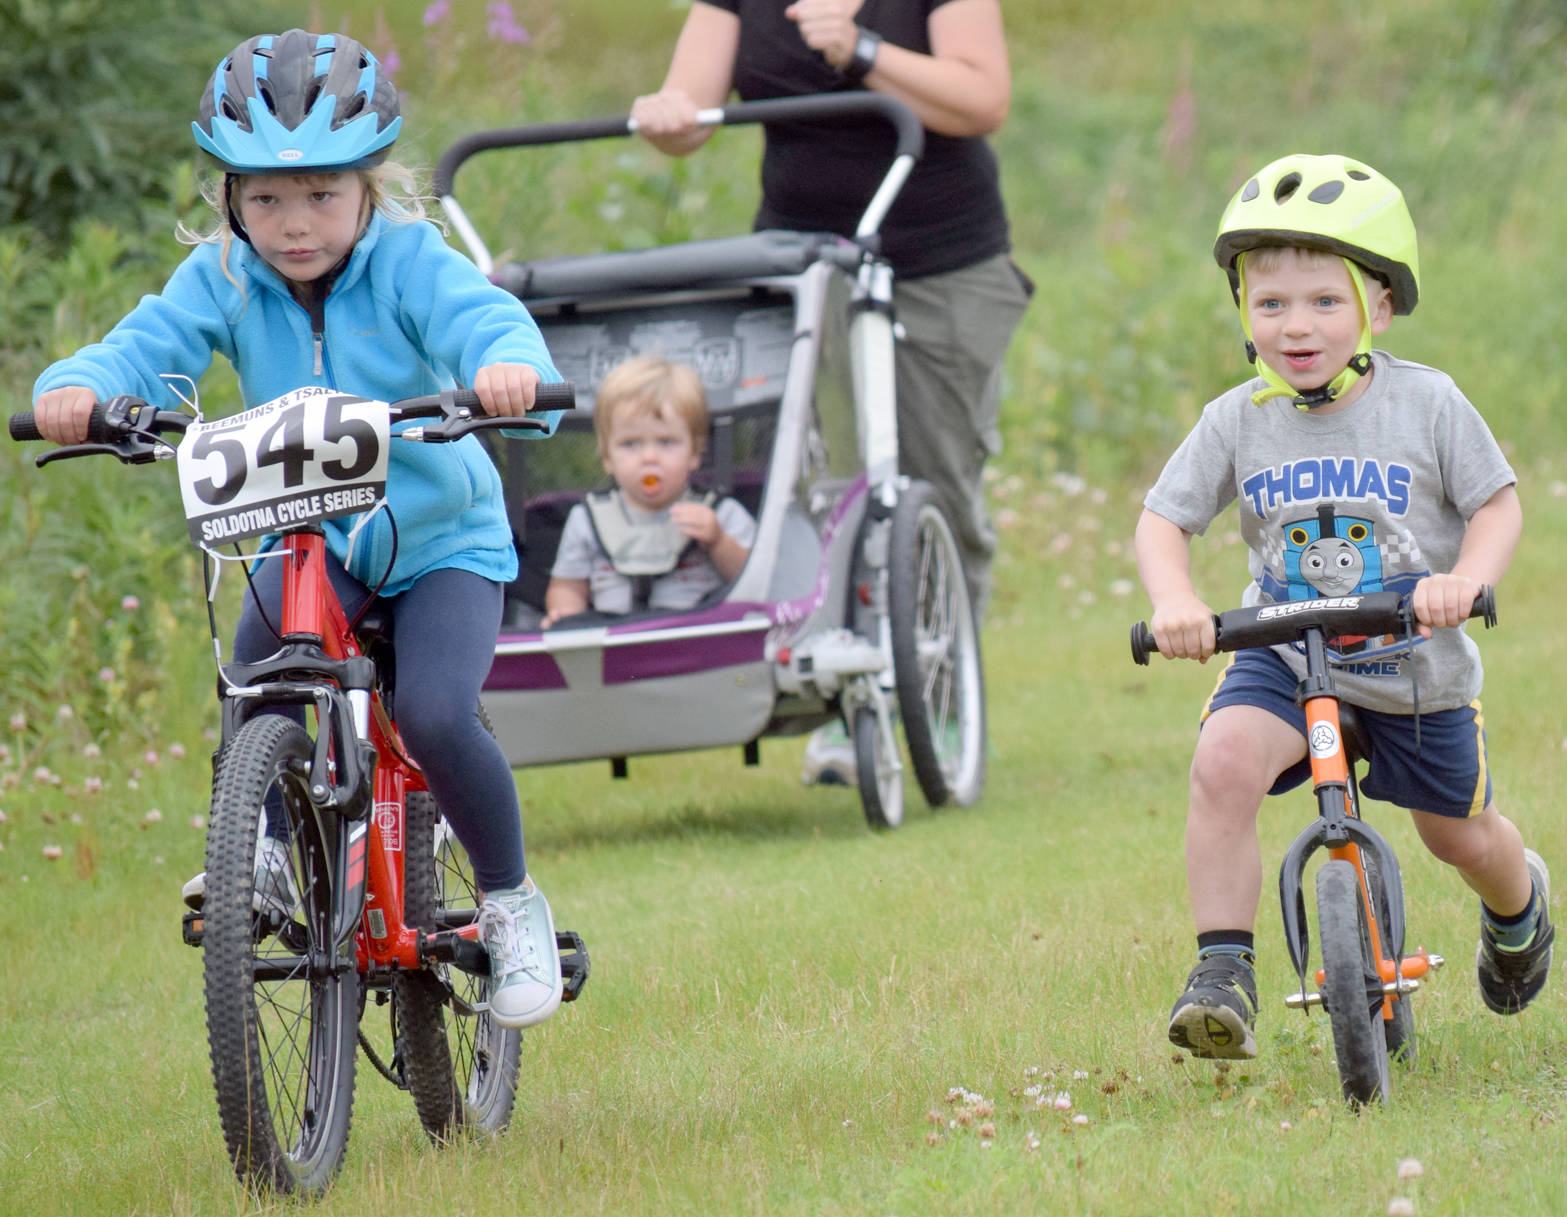 Rosemary Dura and Nathan Nelson compete during the kids race at the Soldotna Cycle Series on Thursday at Tsalteshi Trails. (Photo by Jeff Helminiak/Peninsula Clarion)